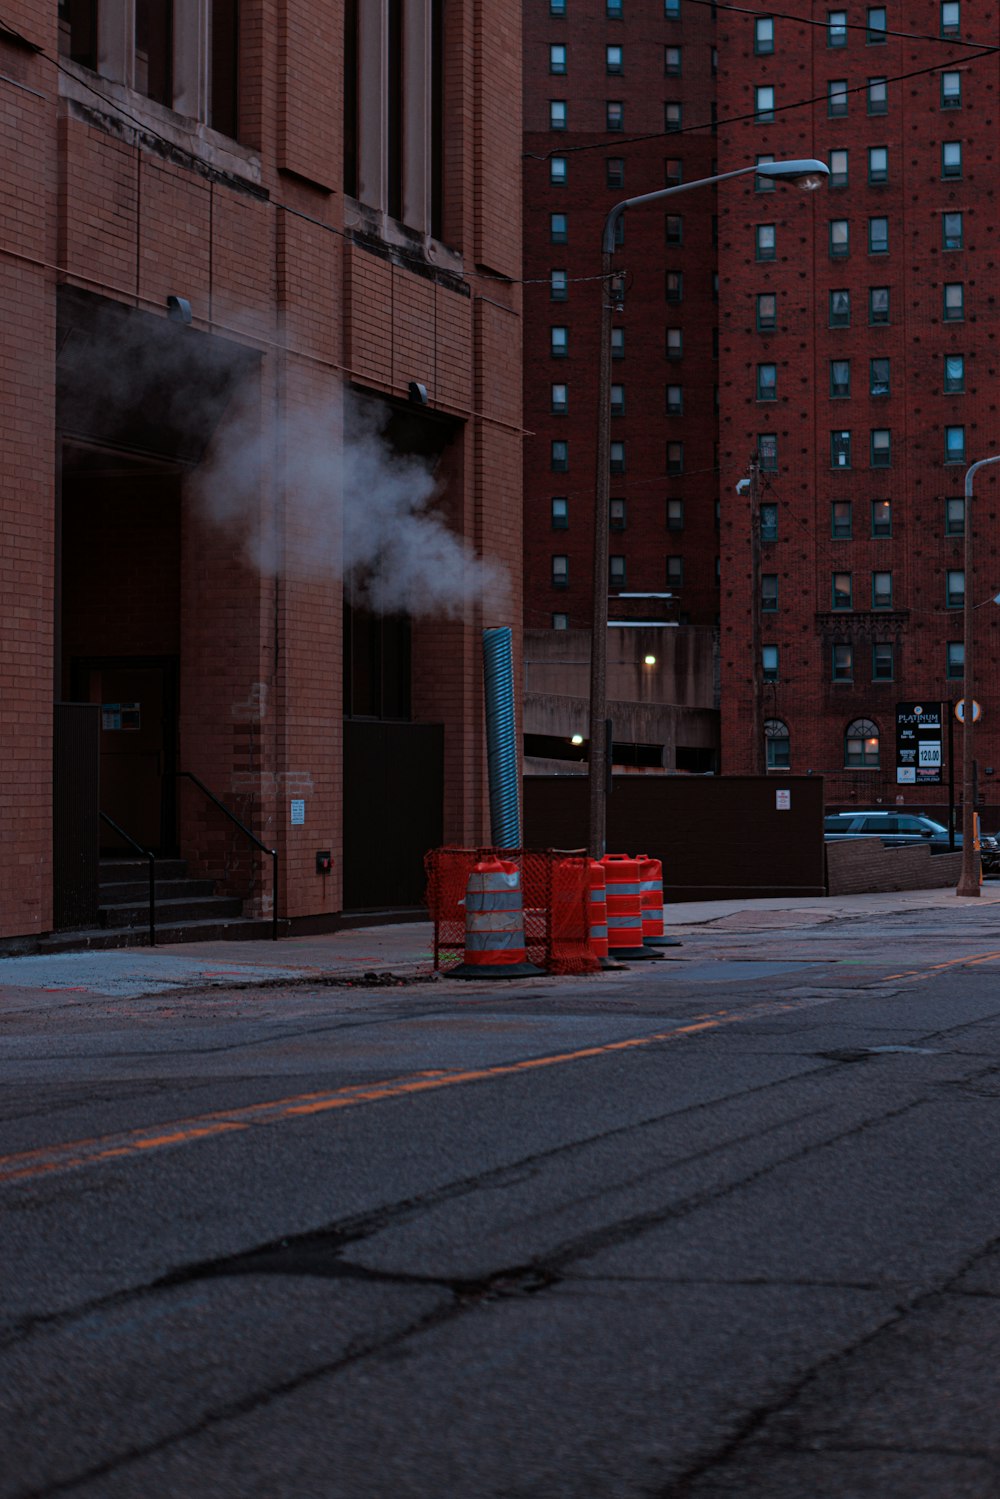 smoke coming out of a pipe on a city street